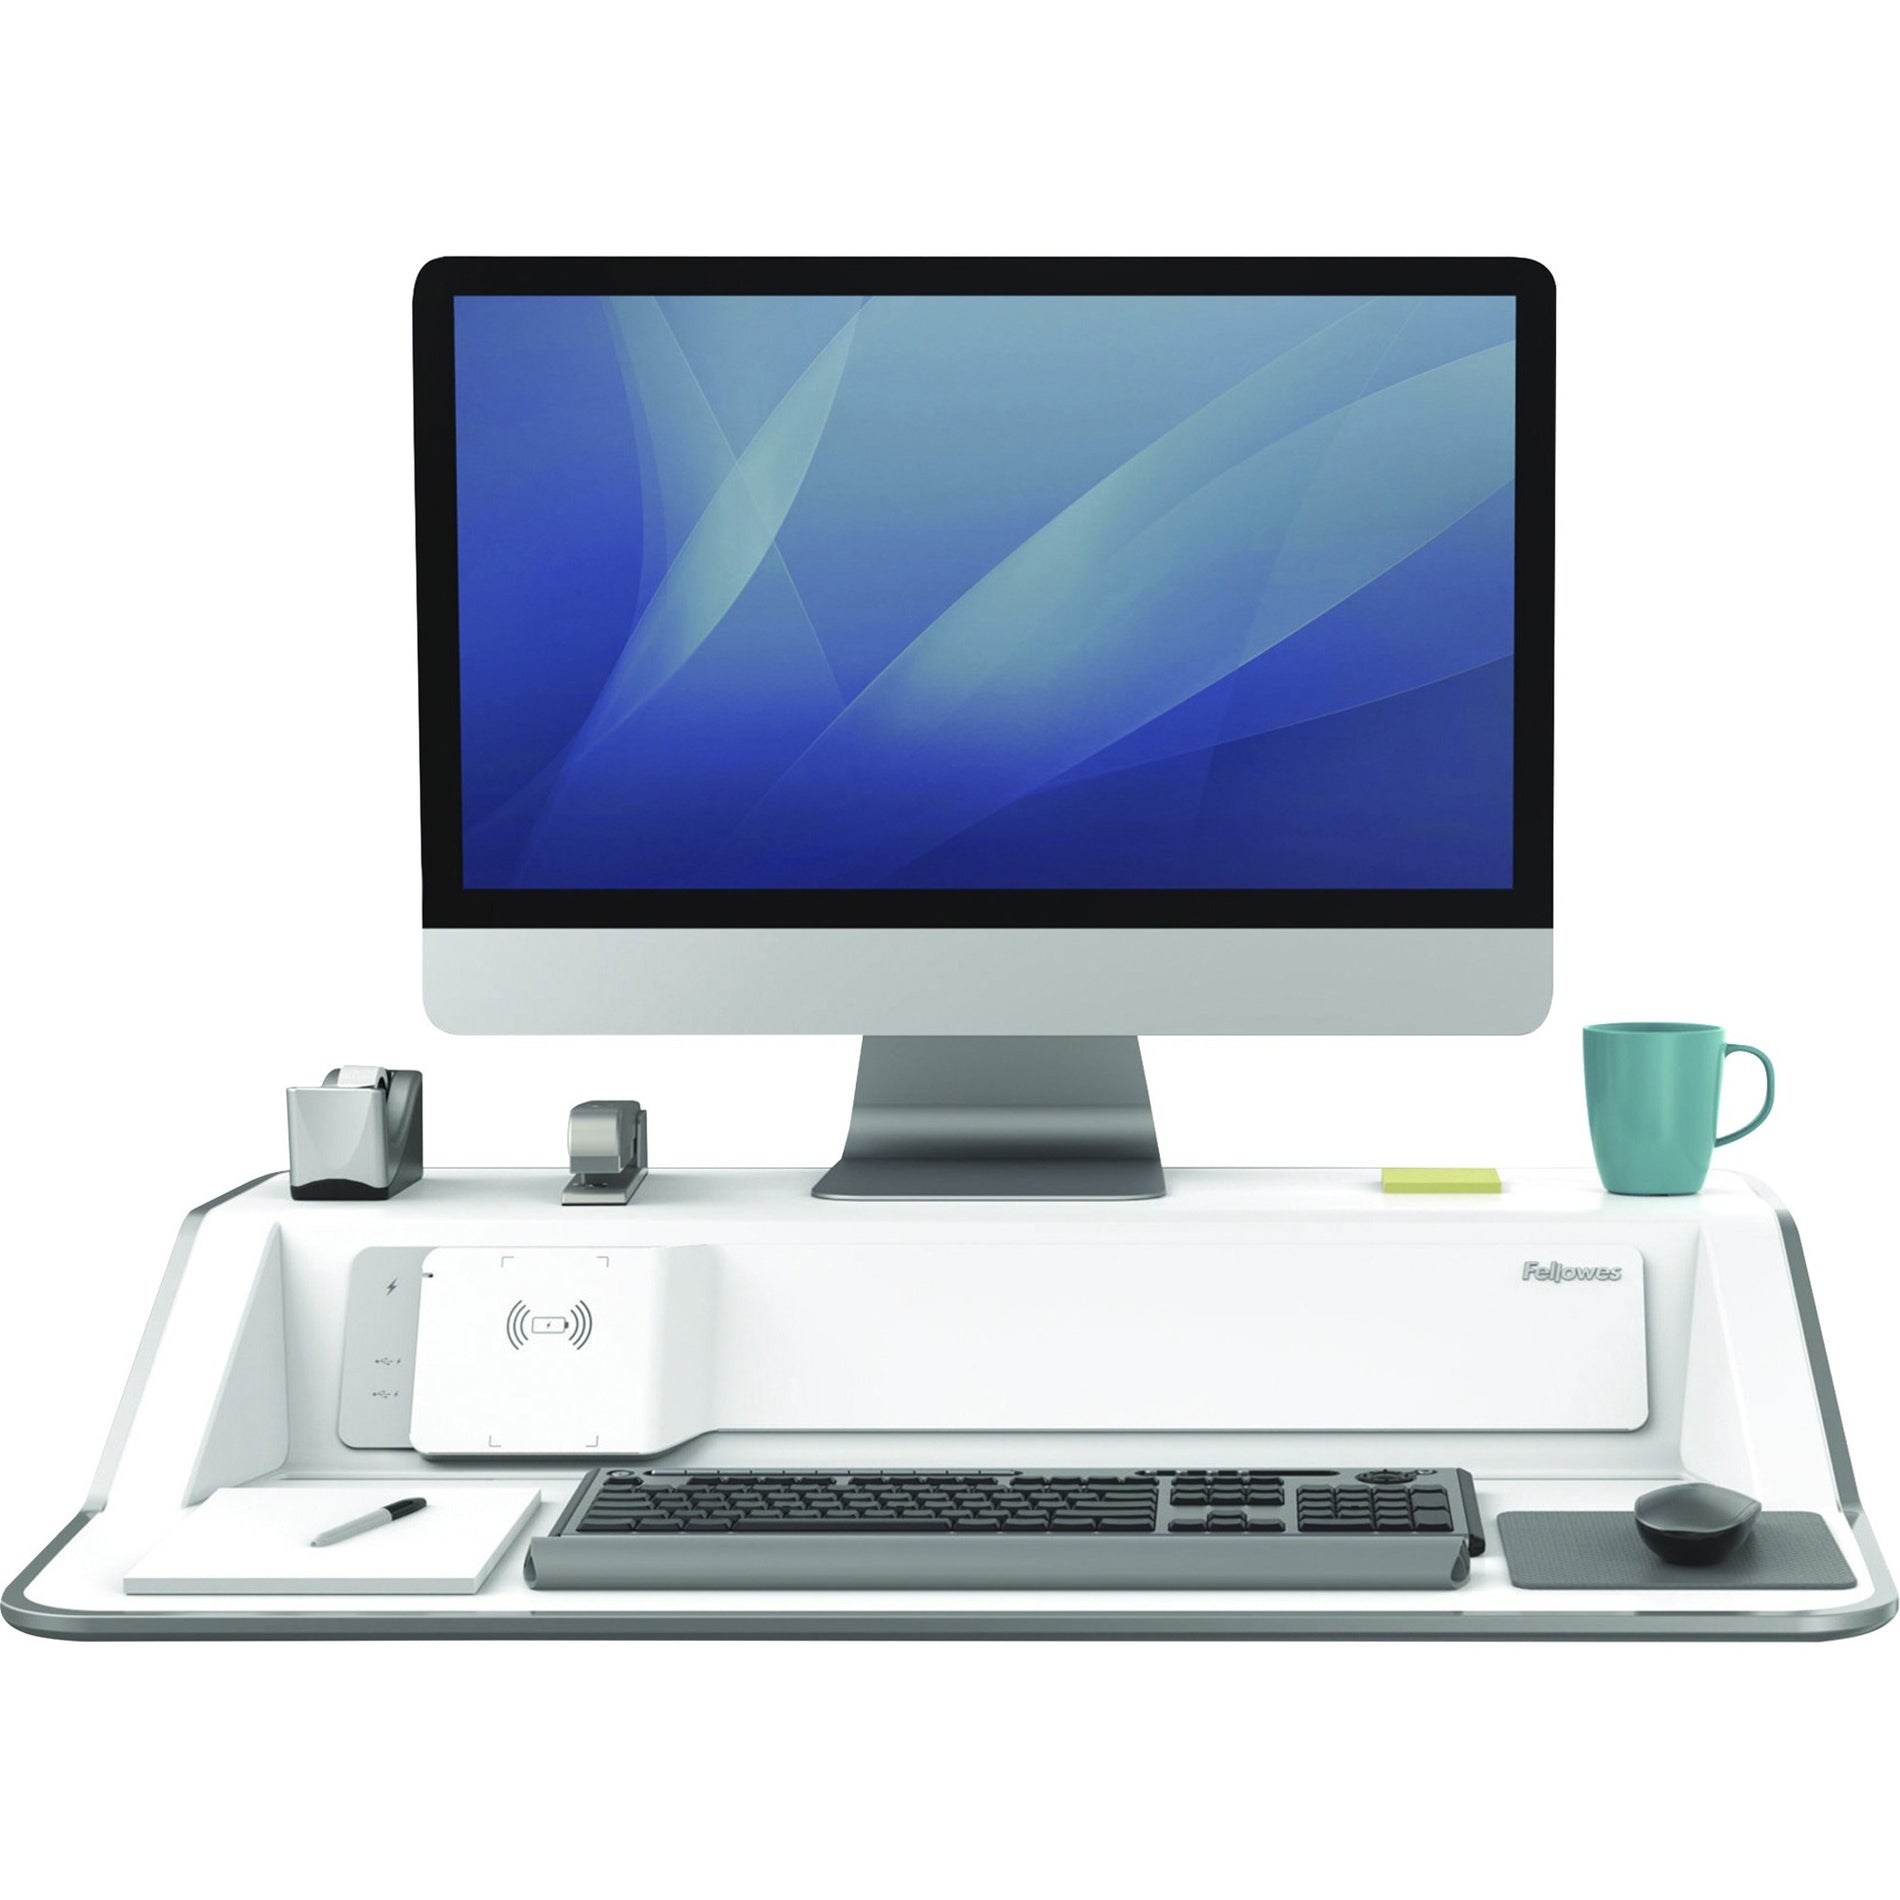 Fellowes 8080201 Lotus DX Sit-Stand Workstation, White - Antimicrobial, Charge Function, Built-in USB Port